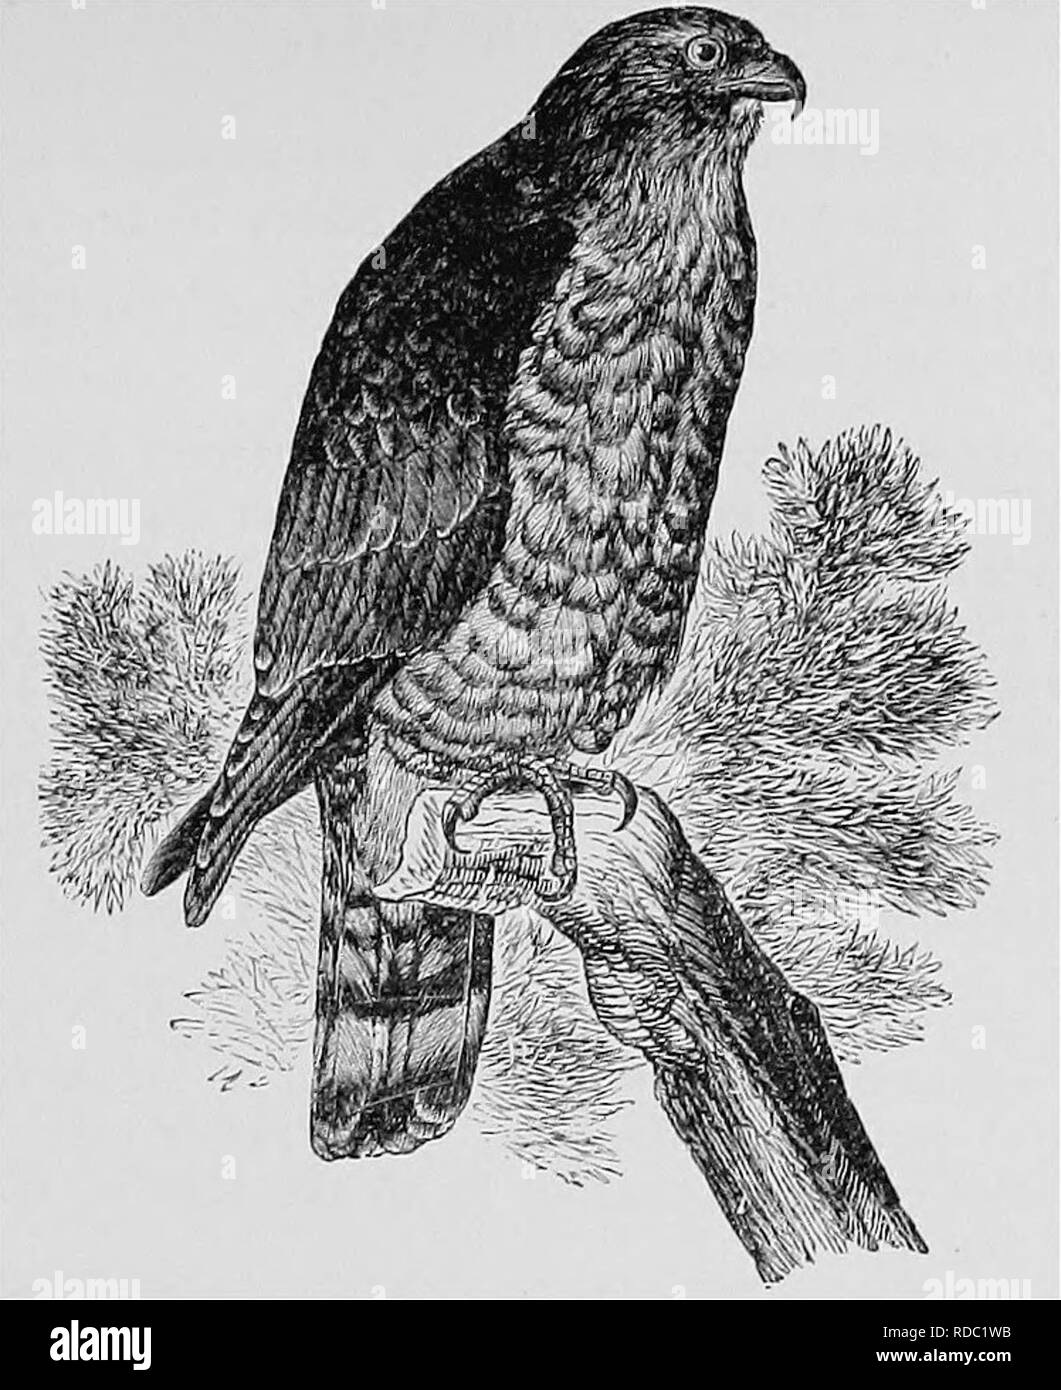 . A popular handbook of the ornithology of the United States and Canada, based on Nuttall's Manual. Birds; Birds. BROAD-WINGED HAWK. BUTEO LATISSIMUS. Char. Above, dull brown, the feathers with paler edges; tail brown with four light bars and tipped with white; below, buffish or tawny, barred and streaked with rufous; wings short and broad Length 13^ to 15 inches. Nest. In a tree ; loosely built of twigs, and lined with leaves and feathers. Eggs. 2-4; buffish, blotched with reddish brown of various shades ; 1.90 X 1.55. This species was obtained by Wilson, in the vicinity of Philadelphia, in t Stock Photo